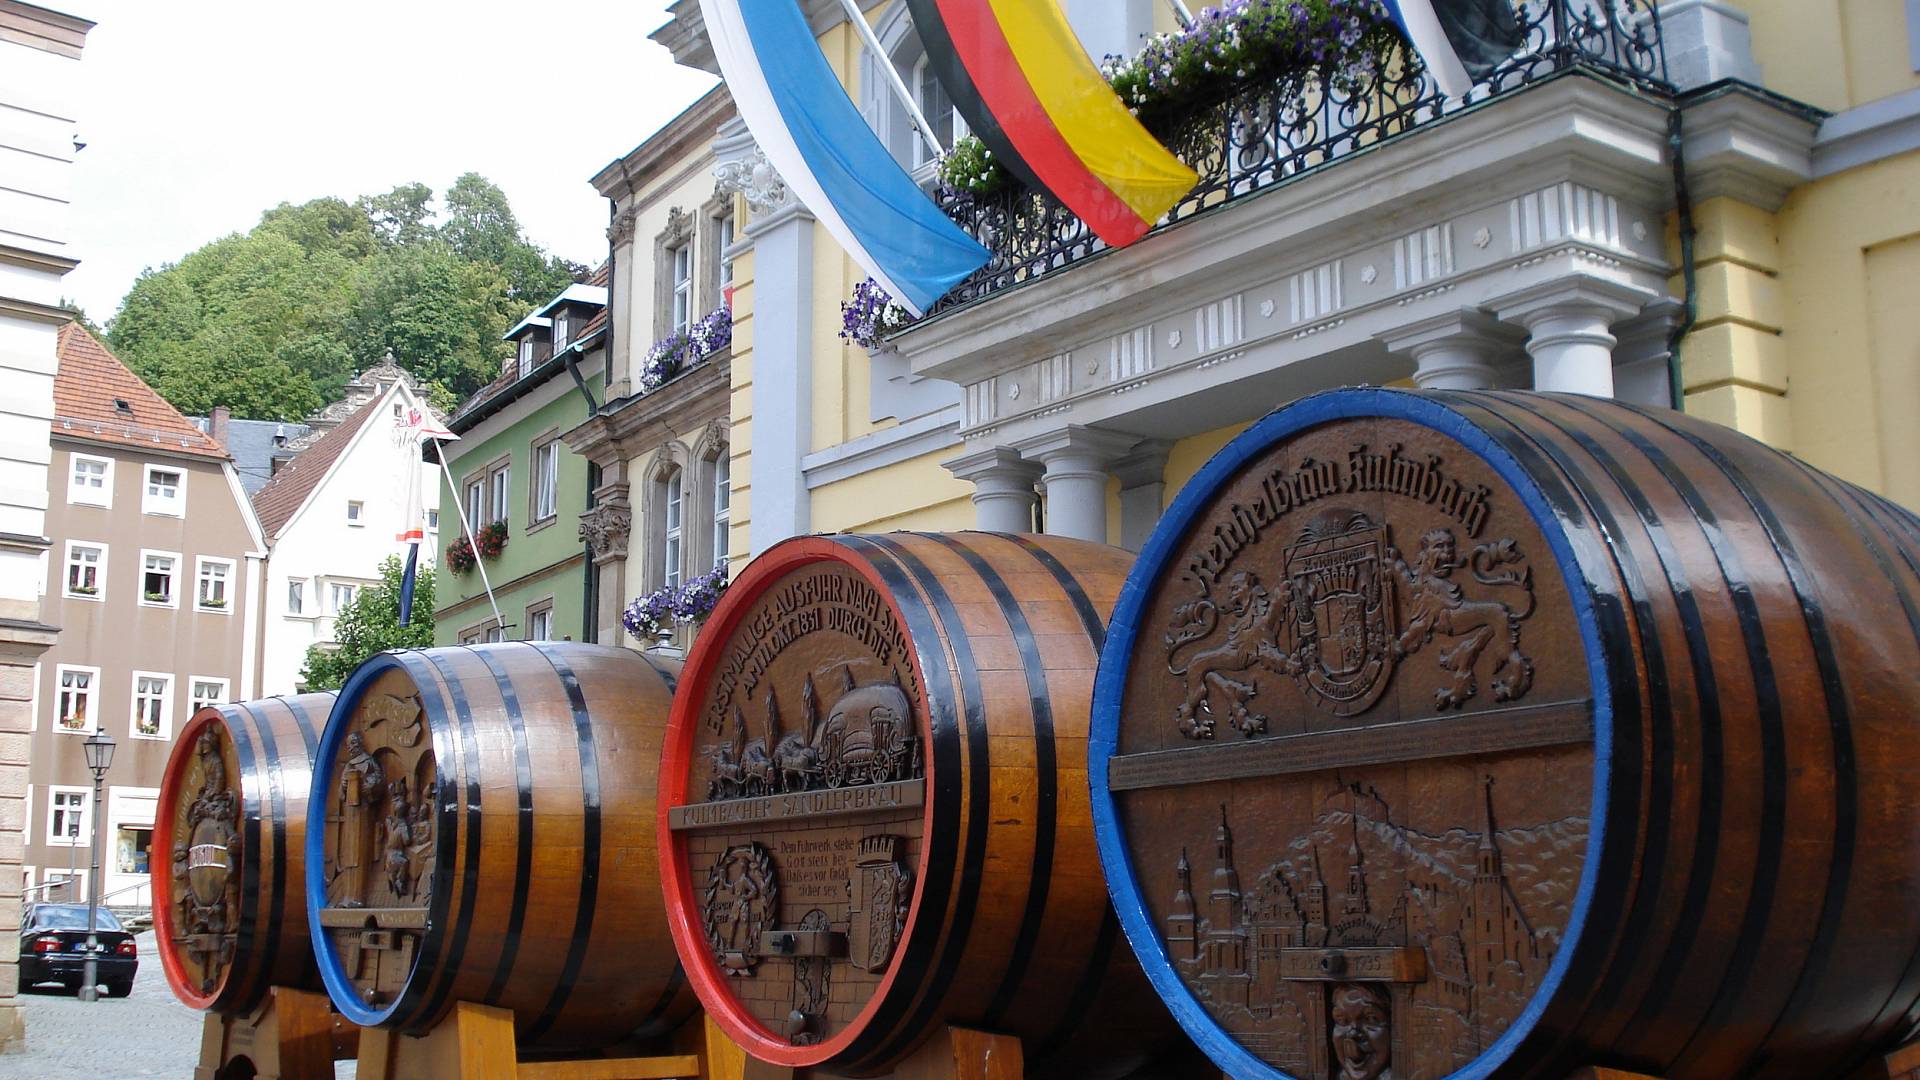 A shot in front of Kulmbach town hall with four large beer barrels [[source: 'Source: City of Kulmbach']]